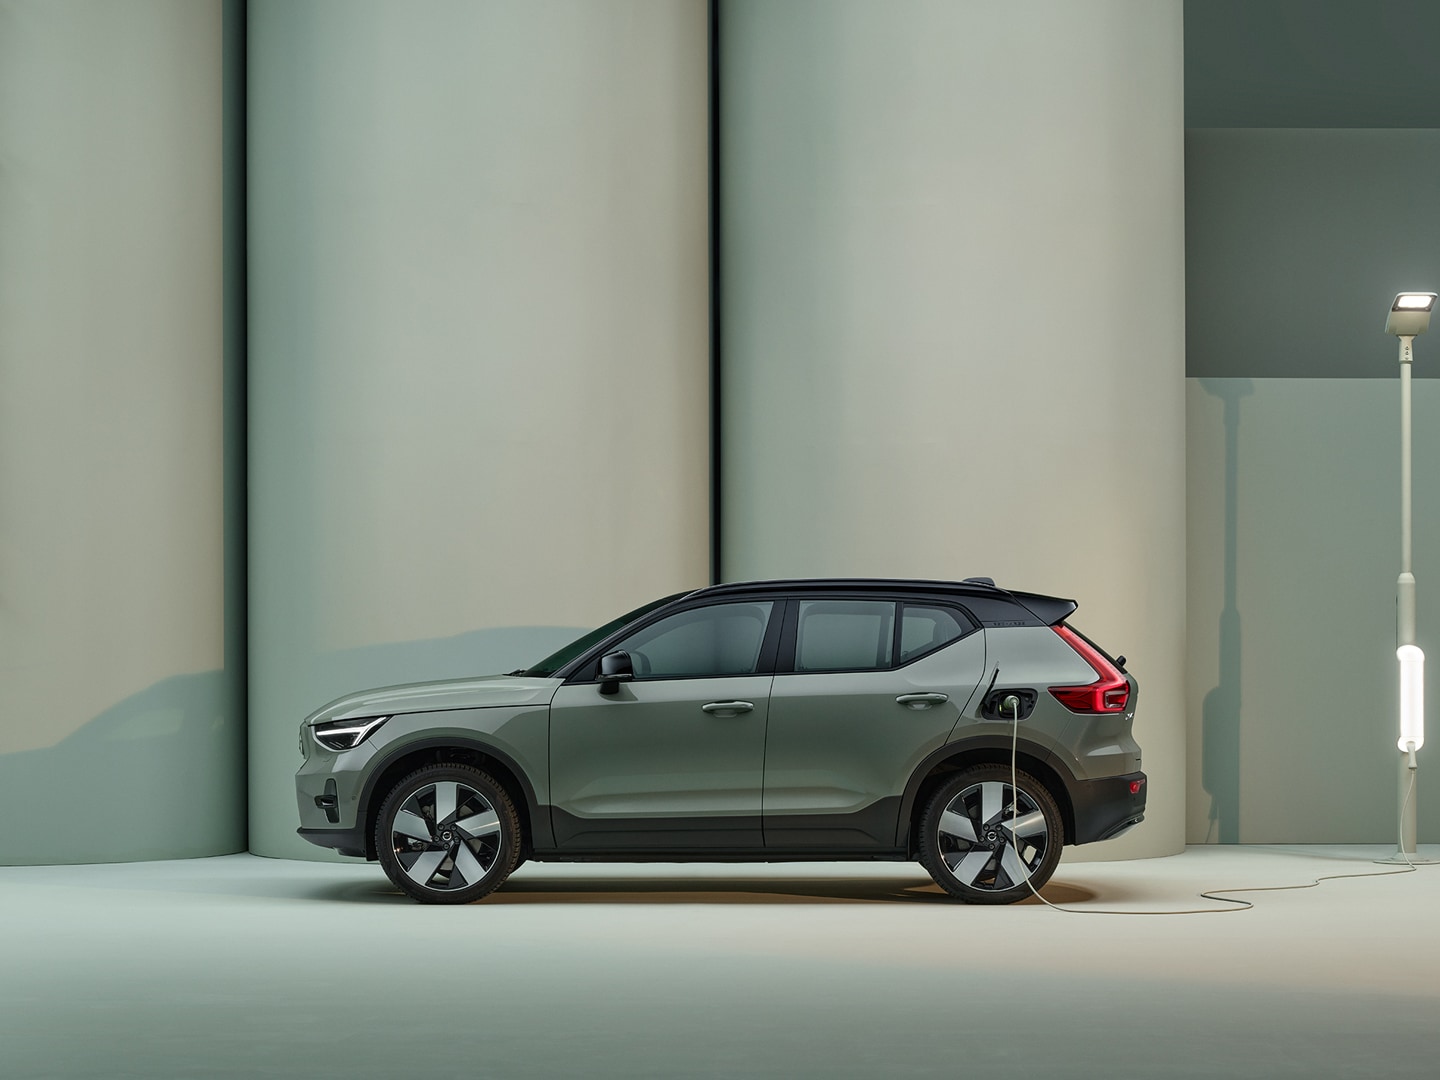 A white Volvo XC40 Recharge electric SUV charged in a pink city